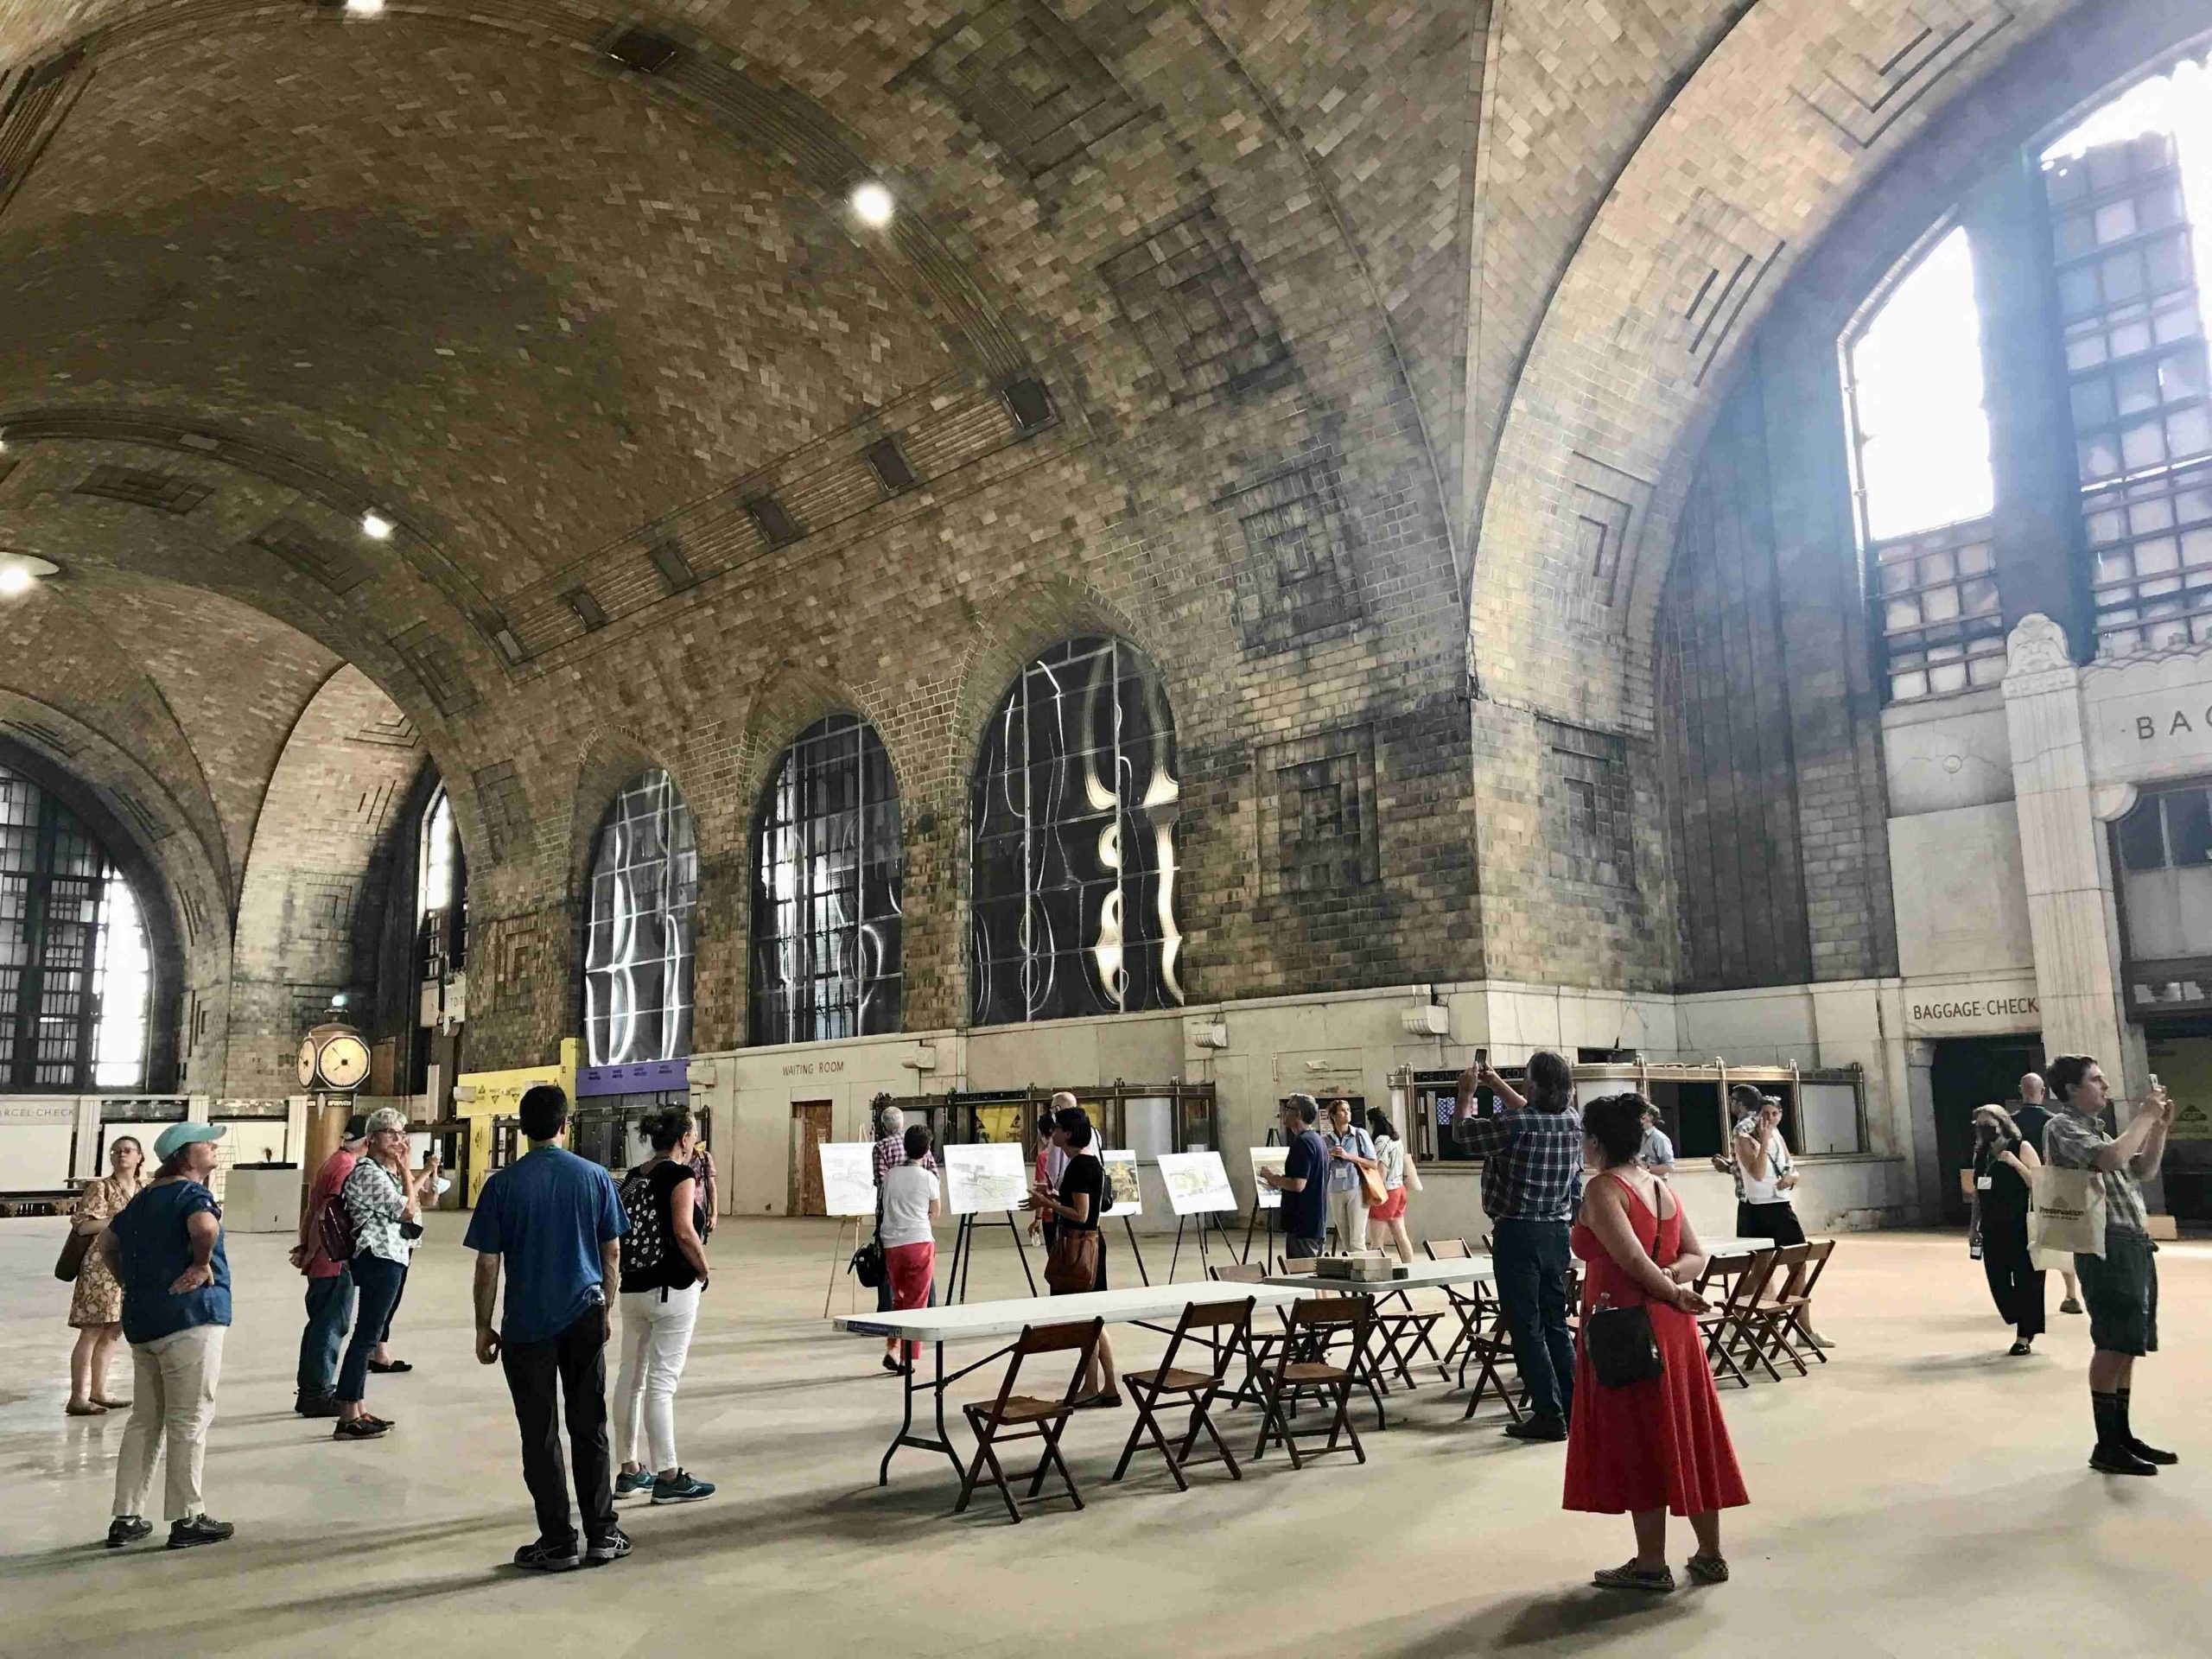 Vaulted interior of a former train station in Buffalo, NY. People are milling around looking at plans for the site's reuse. 